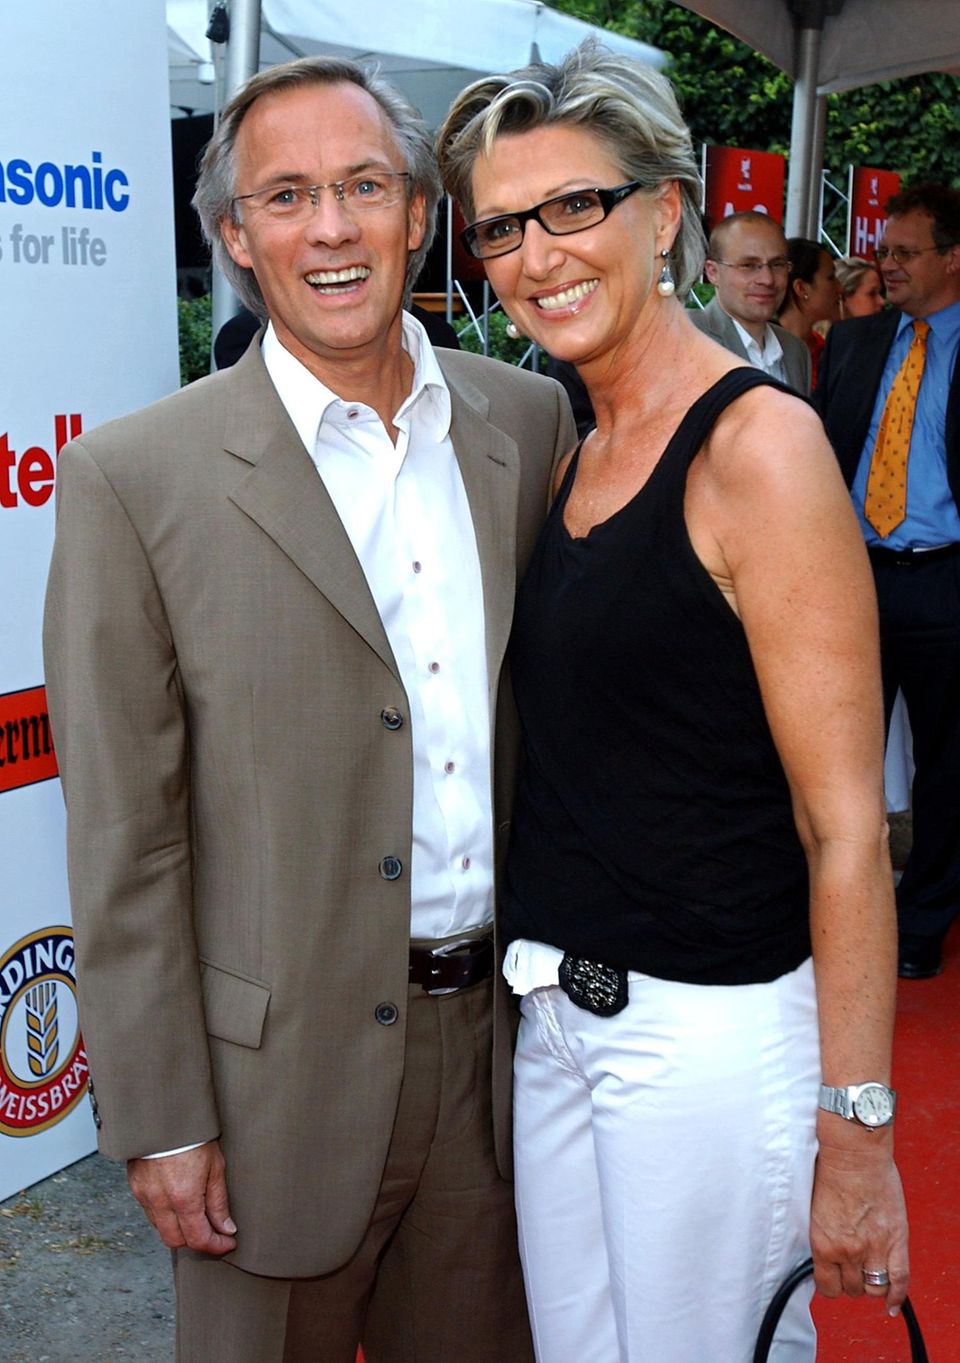 One of Ilona Christen's last public appearances alongside ex-HSV professional Bernd Wehmeyer at the "sports picture"-Awards in August 2004 in Hamburg.